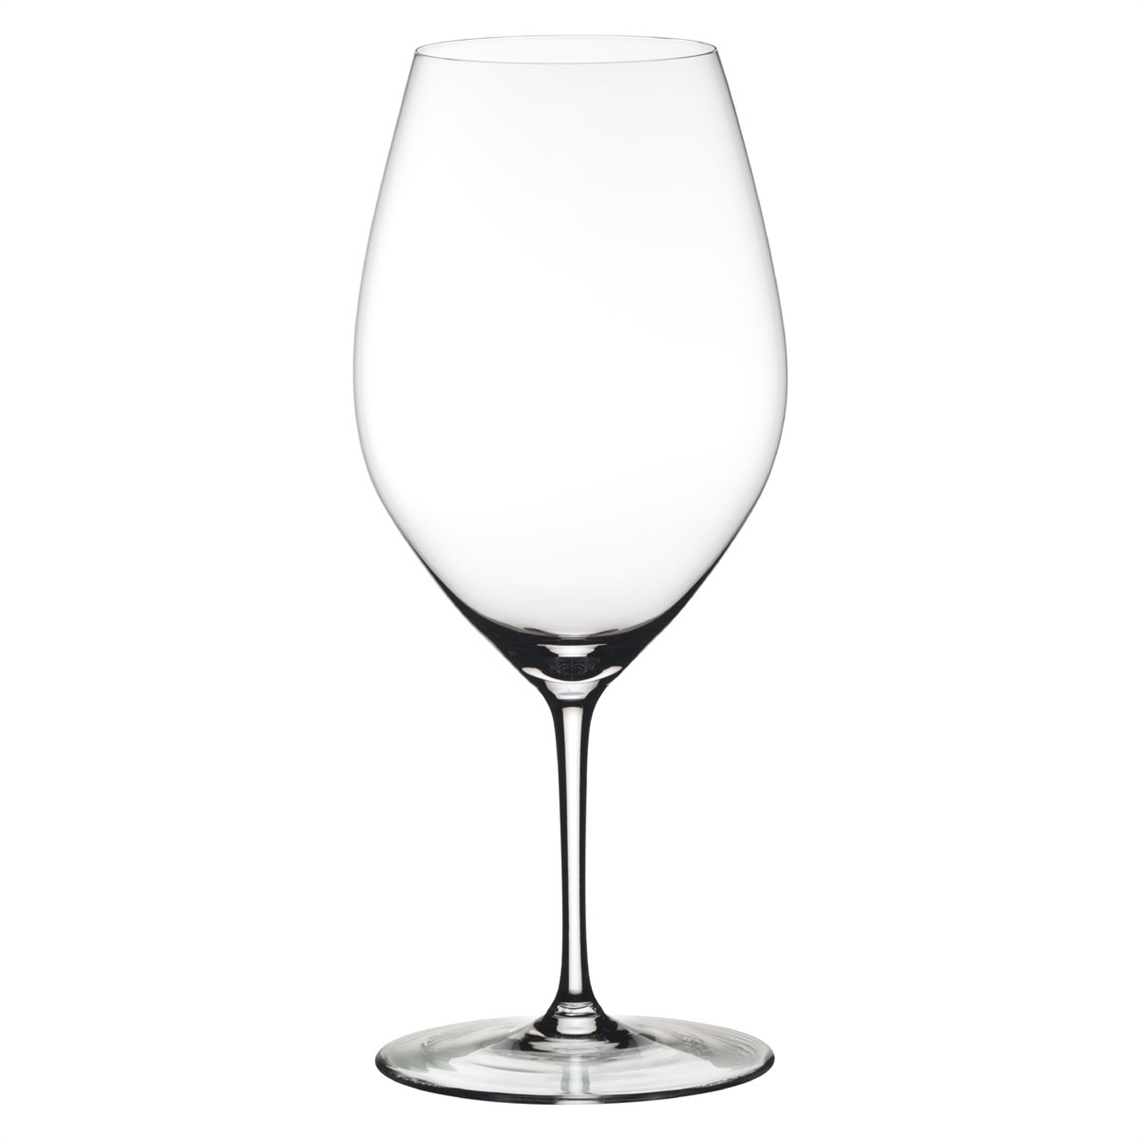 Riedel Wine Friendly Magnum Red Wine Glass 001 - Set of 4 - 6422/01